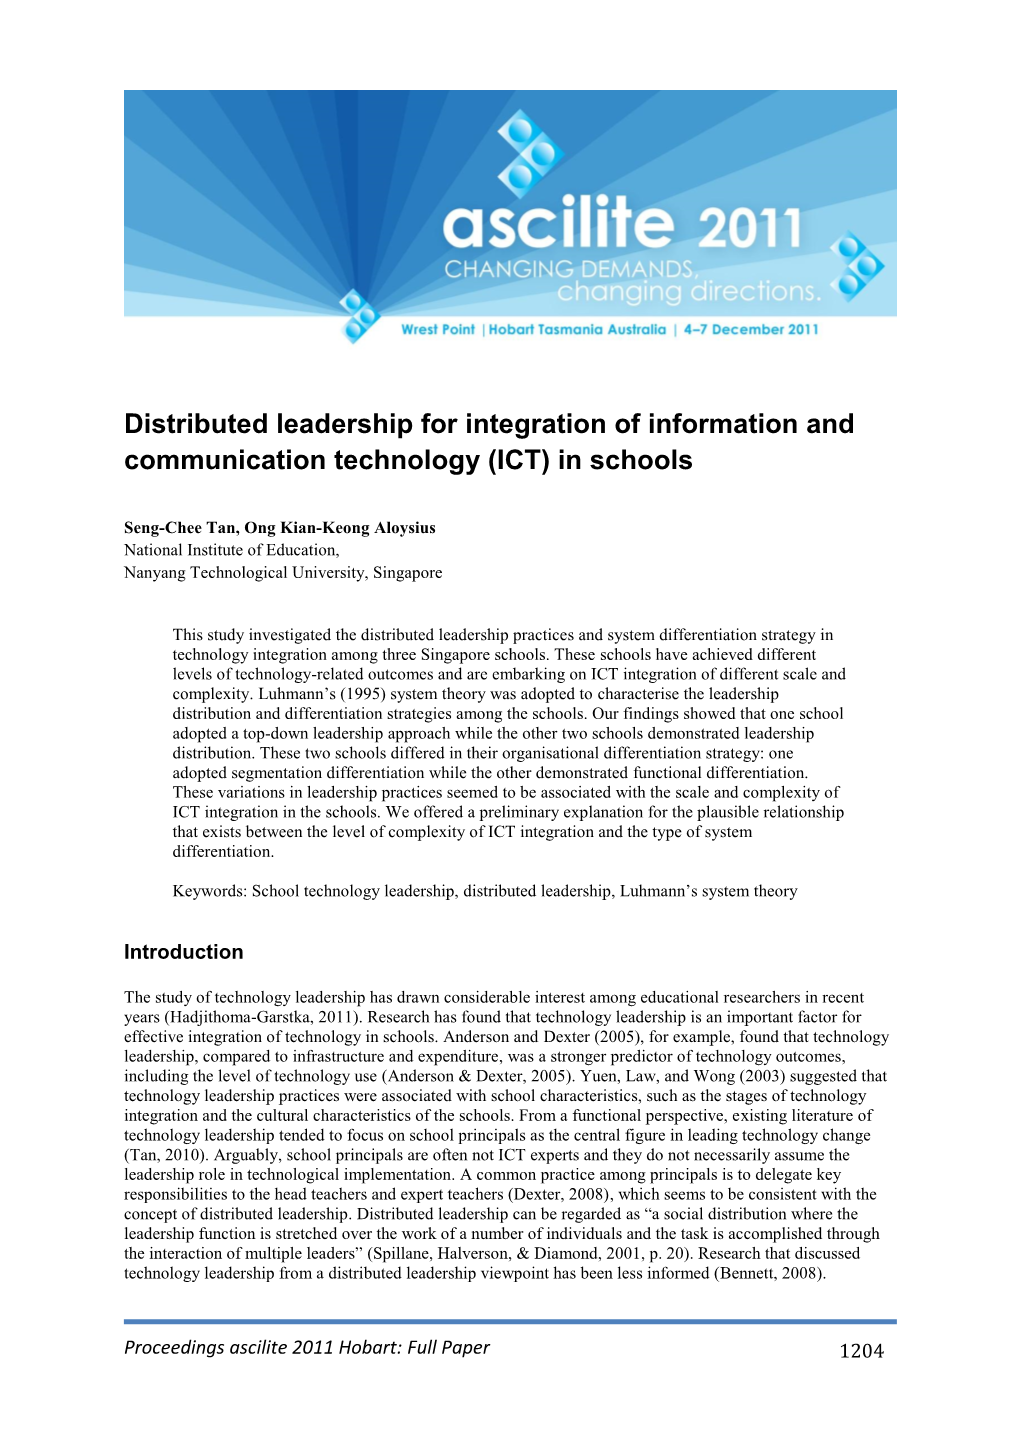 Distributed Leadership for Integration of Information and Communication Technology (ICT) in Schools